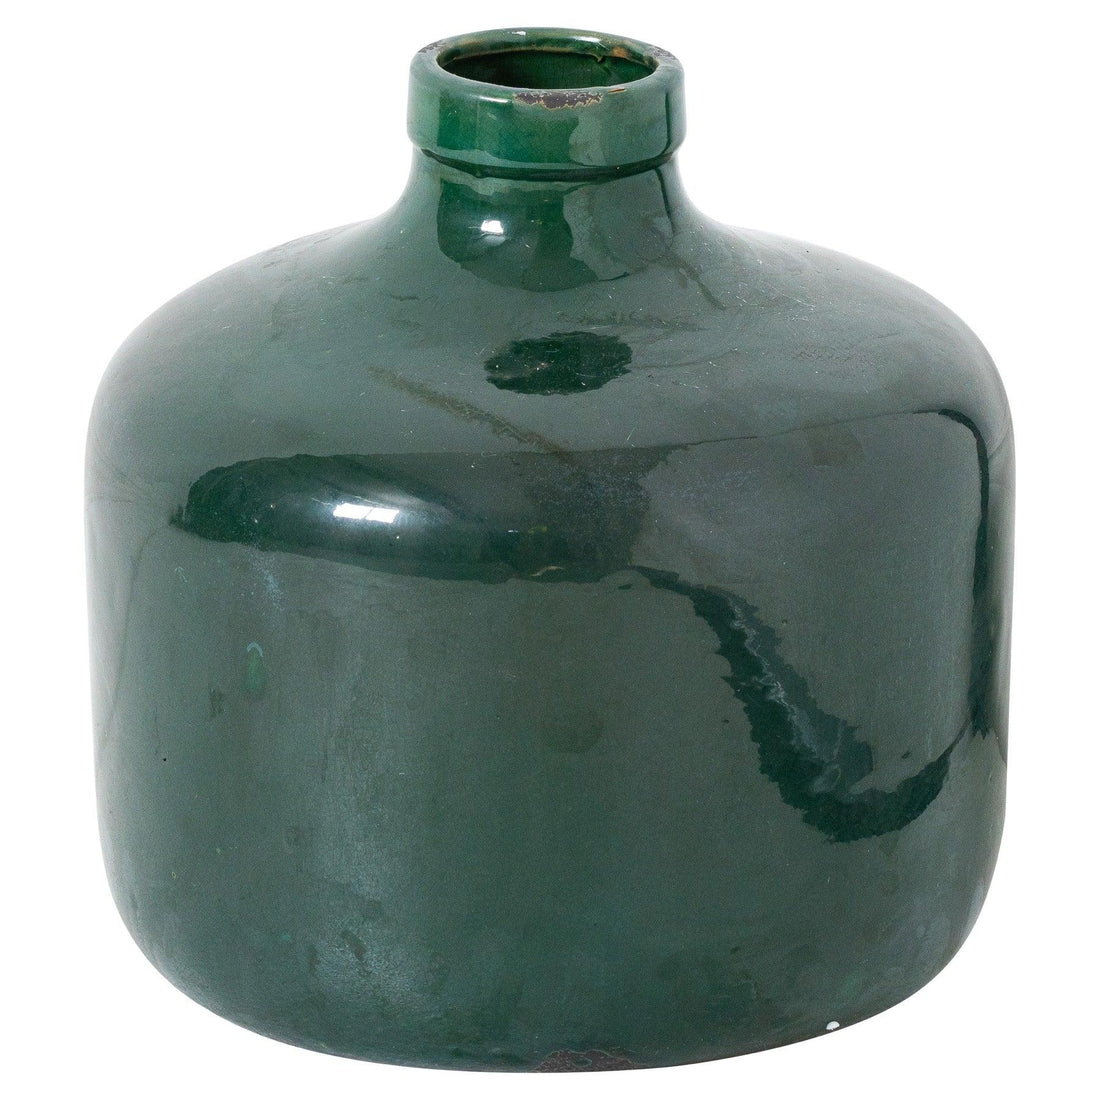 Garda Emerald Glazed Chive Vase - £64.95 - Gifts & Accessories > Vases > Ornaments 